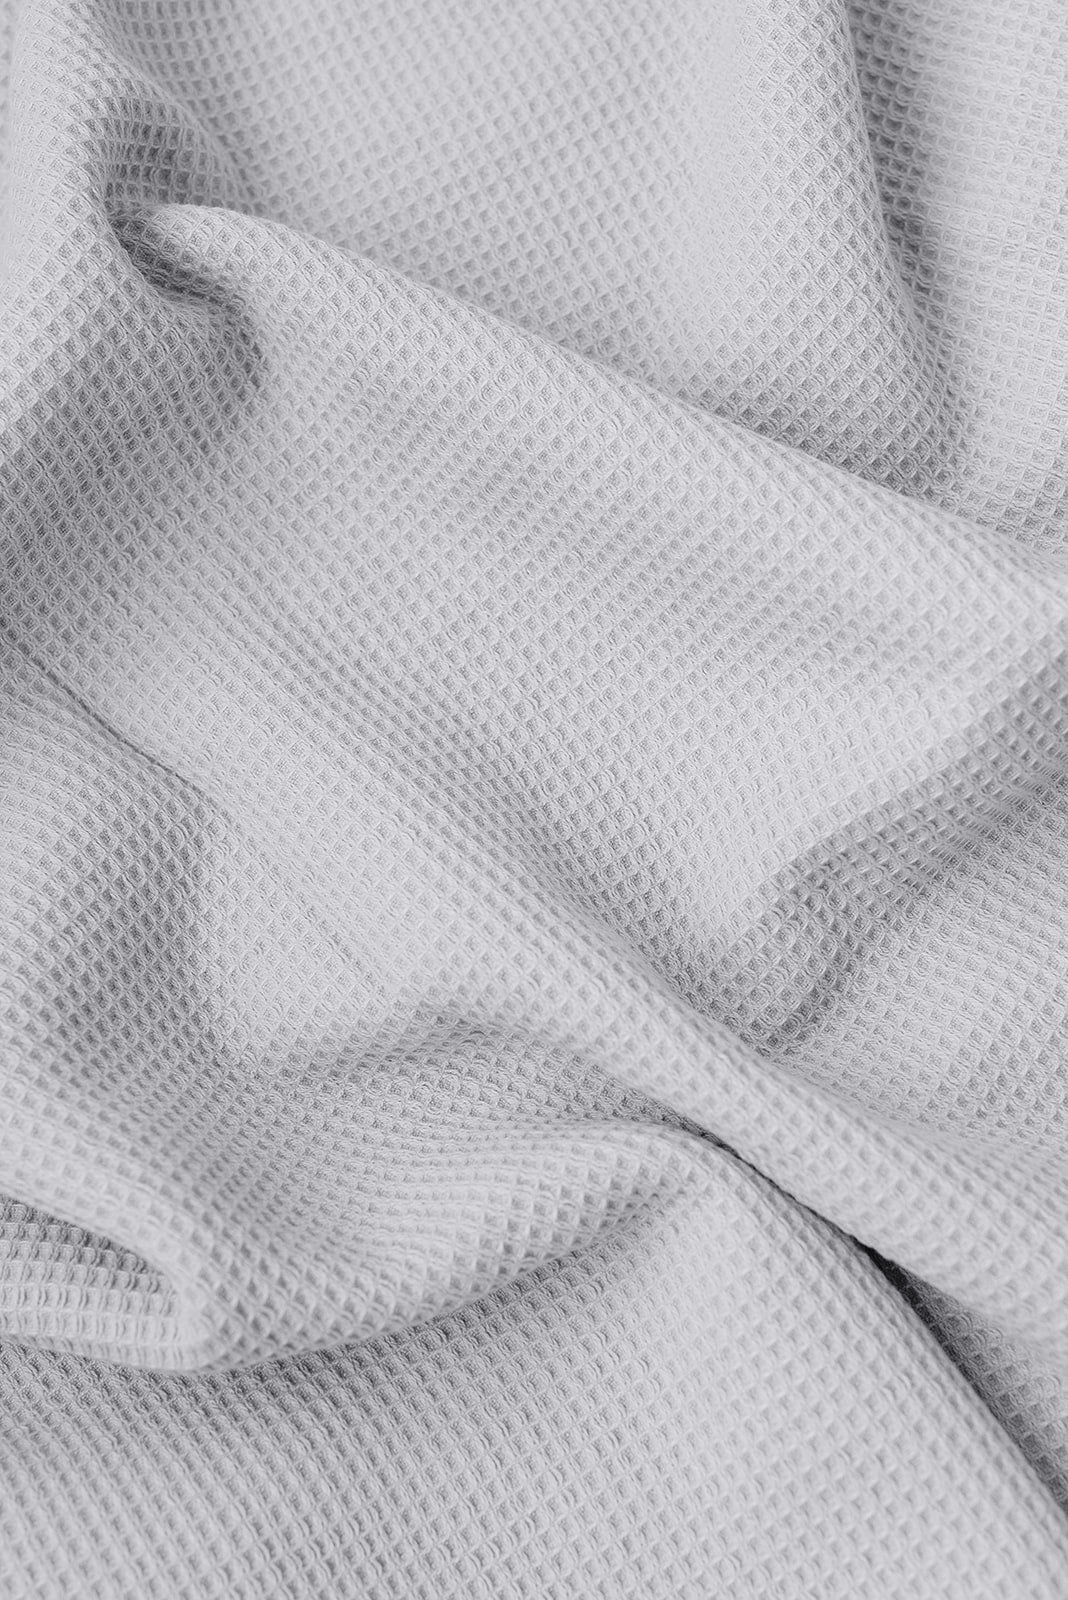 Waffle Bath Towel in the color Harbor Mist. Photo of Harbor Mist Waffle Bath Towel taken as a close up of the Waffle Bath Towel. The picture shows only the towel 